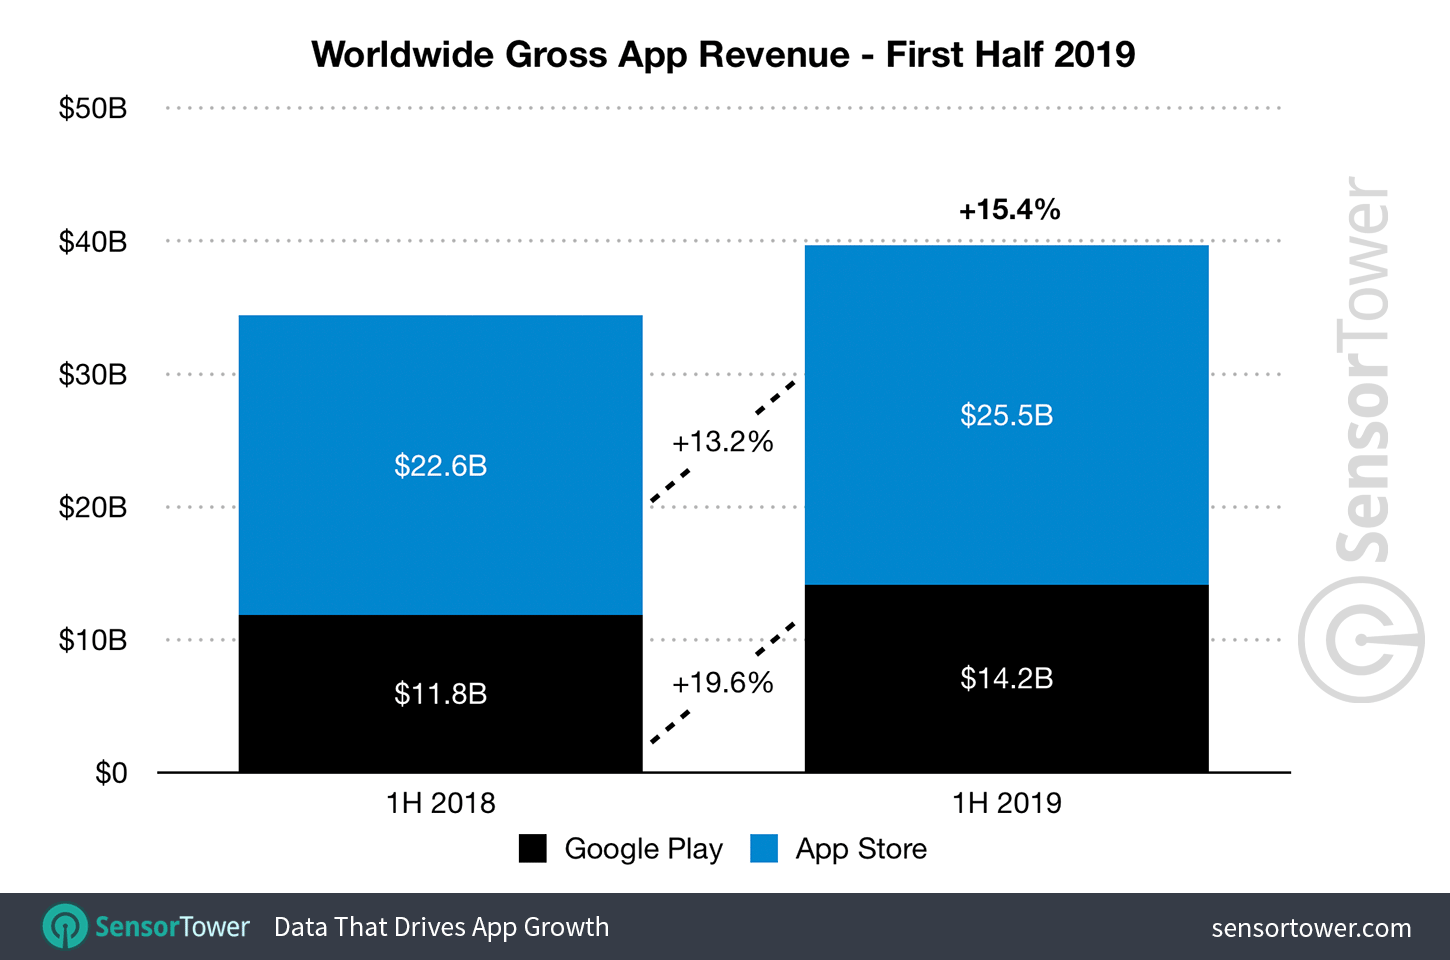 Total App Store and Google Play revenue in 1H19